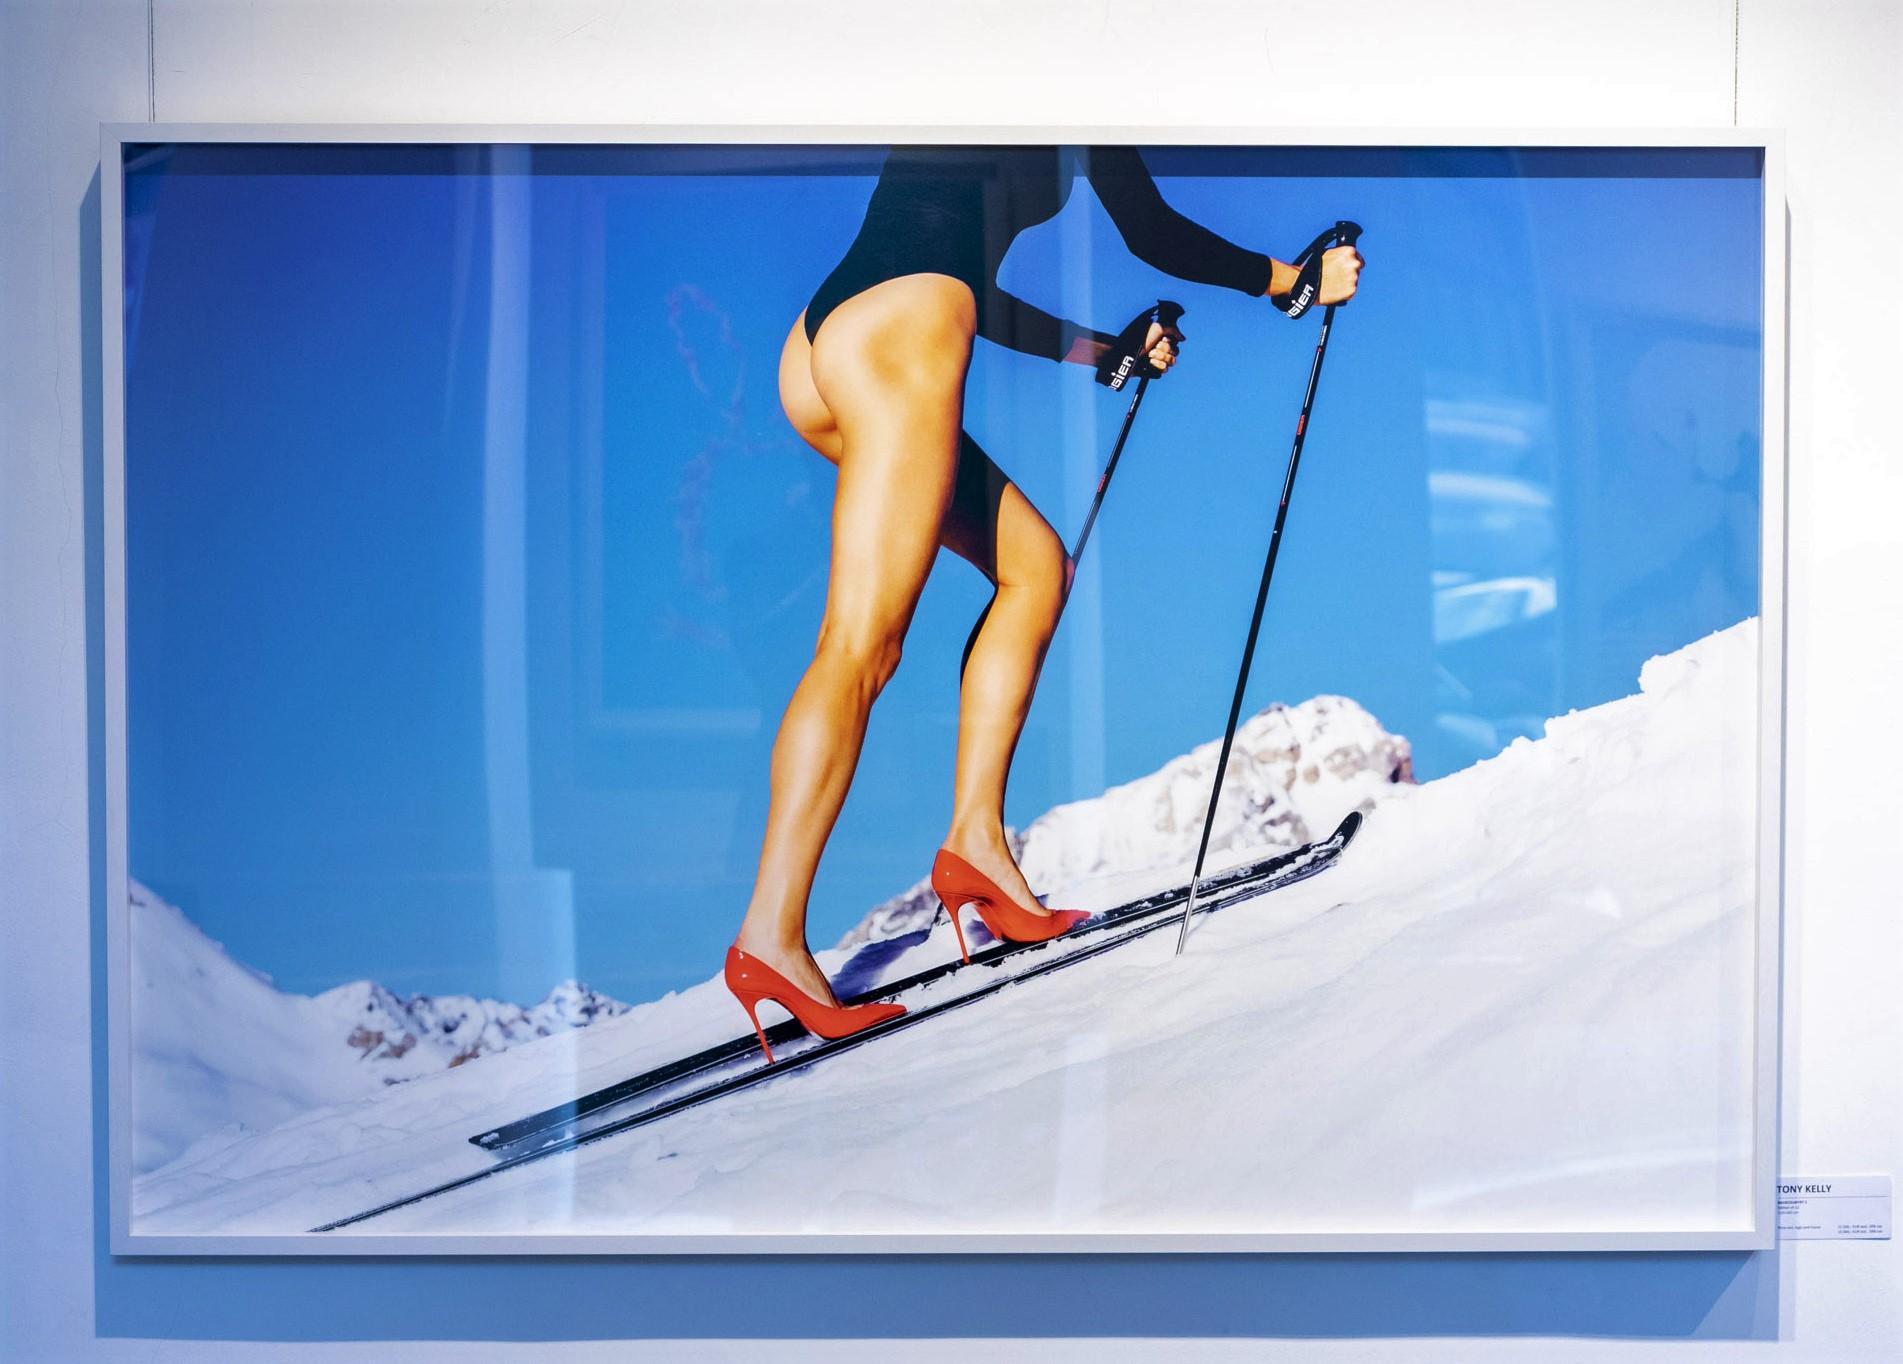 Backcountry  - model skiing with high heels and mountains in the background - Photograph by Tony Kelly